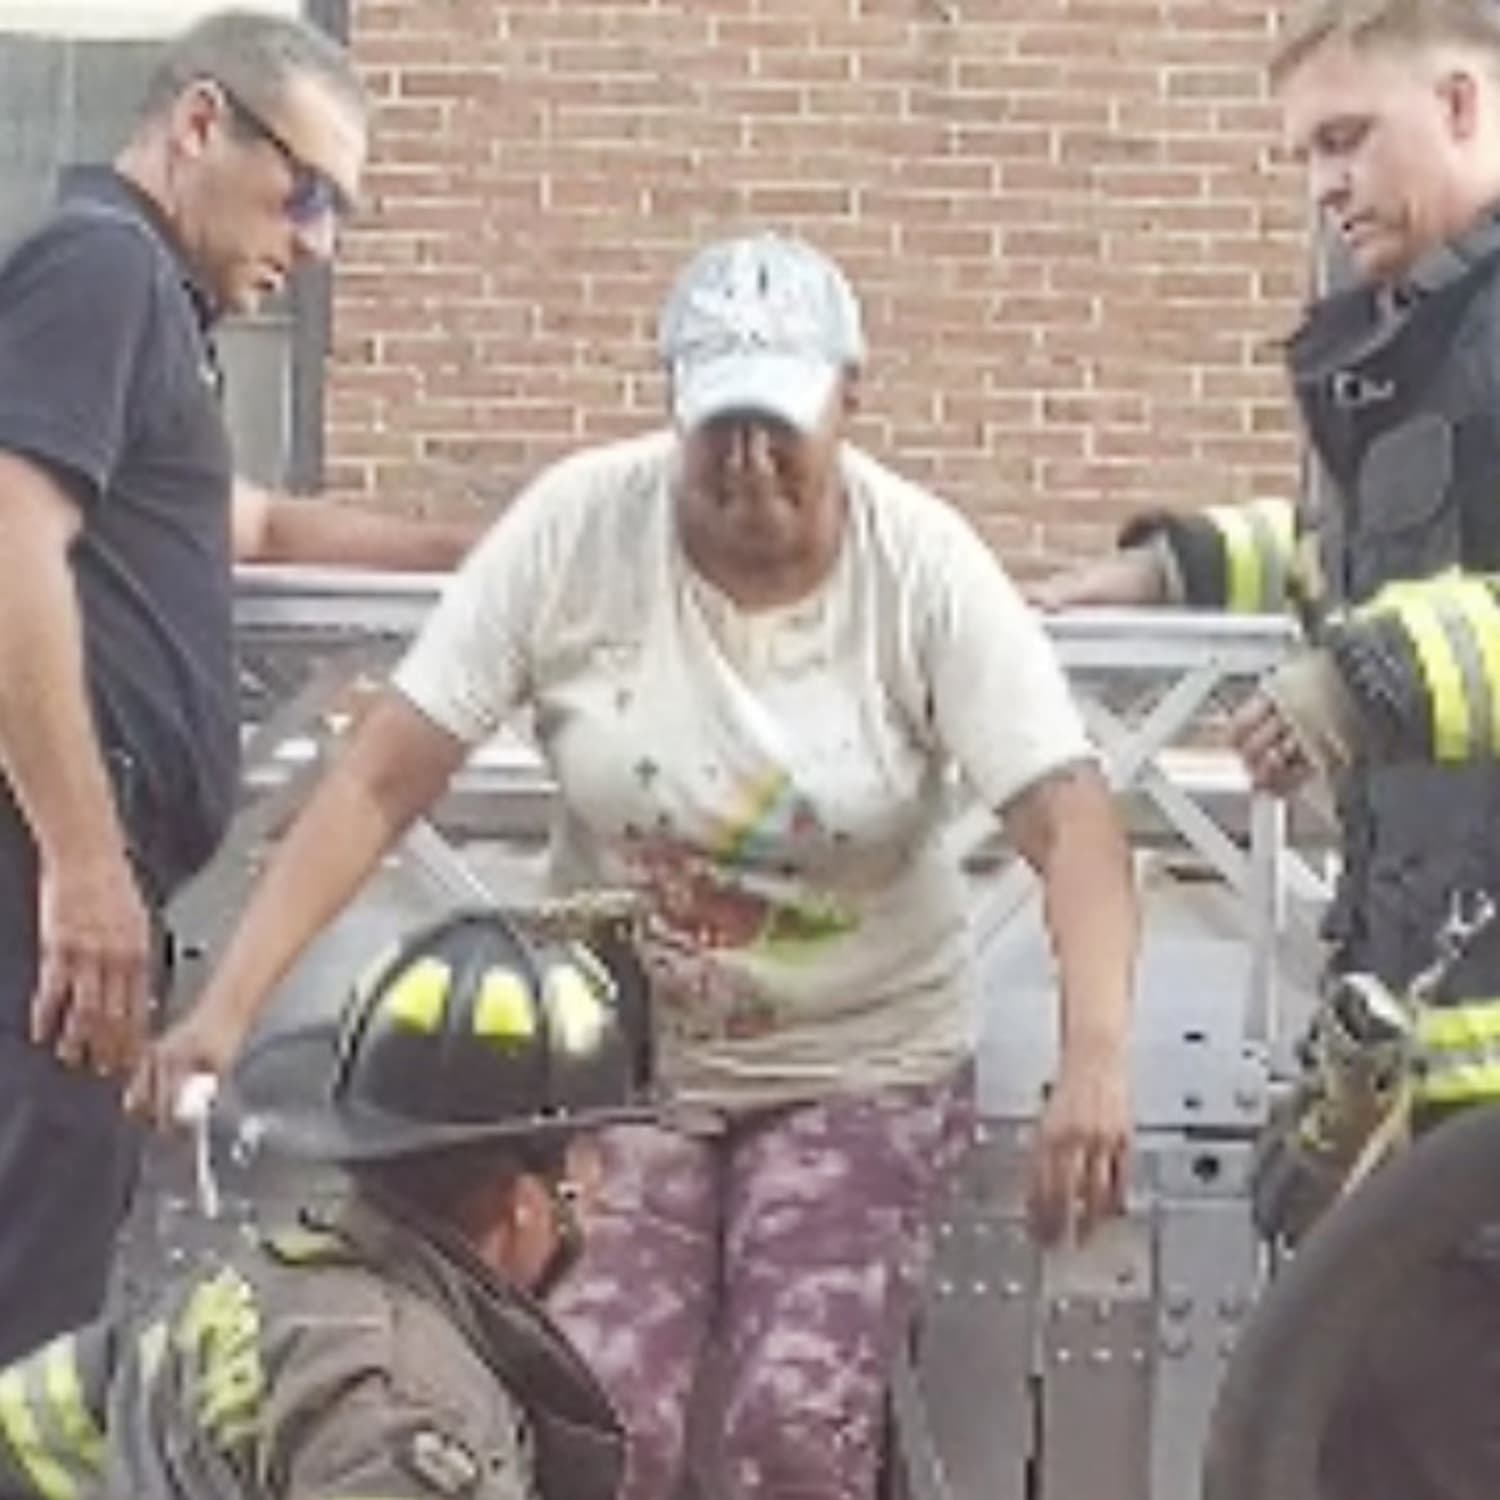 Woman rescued uninjured 24 hours after Iowa building's partial collapse